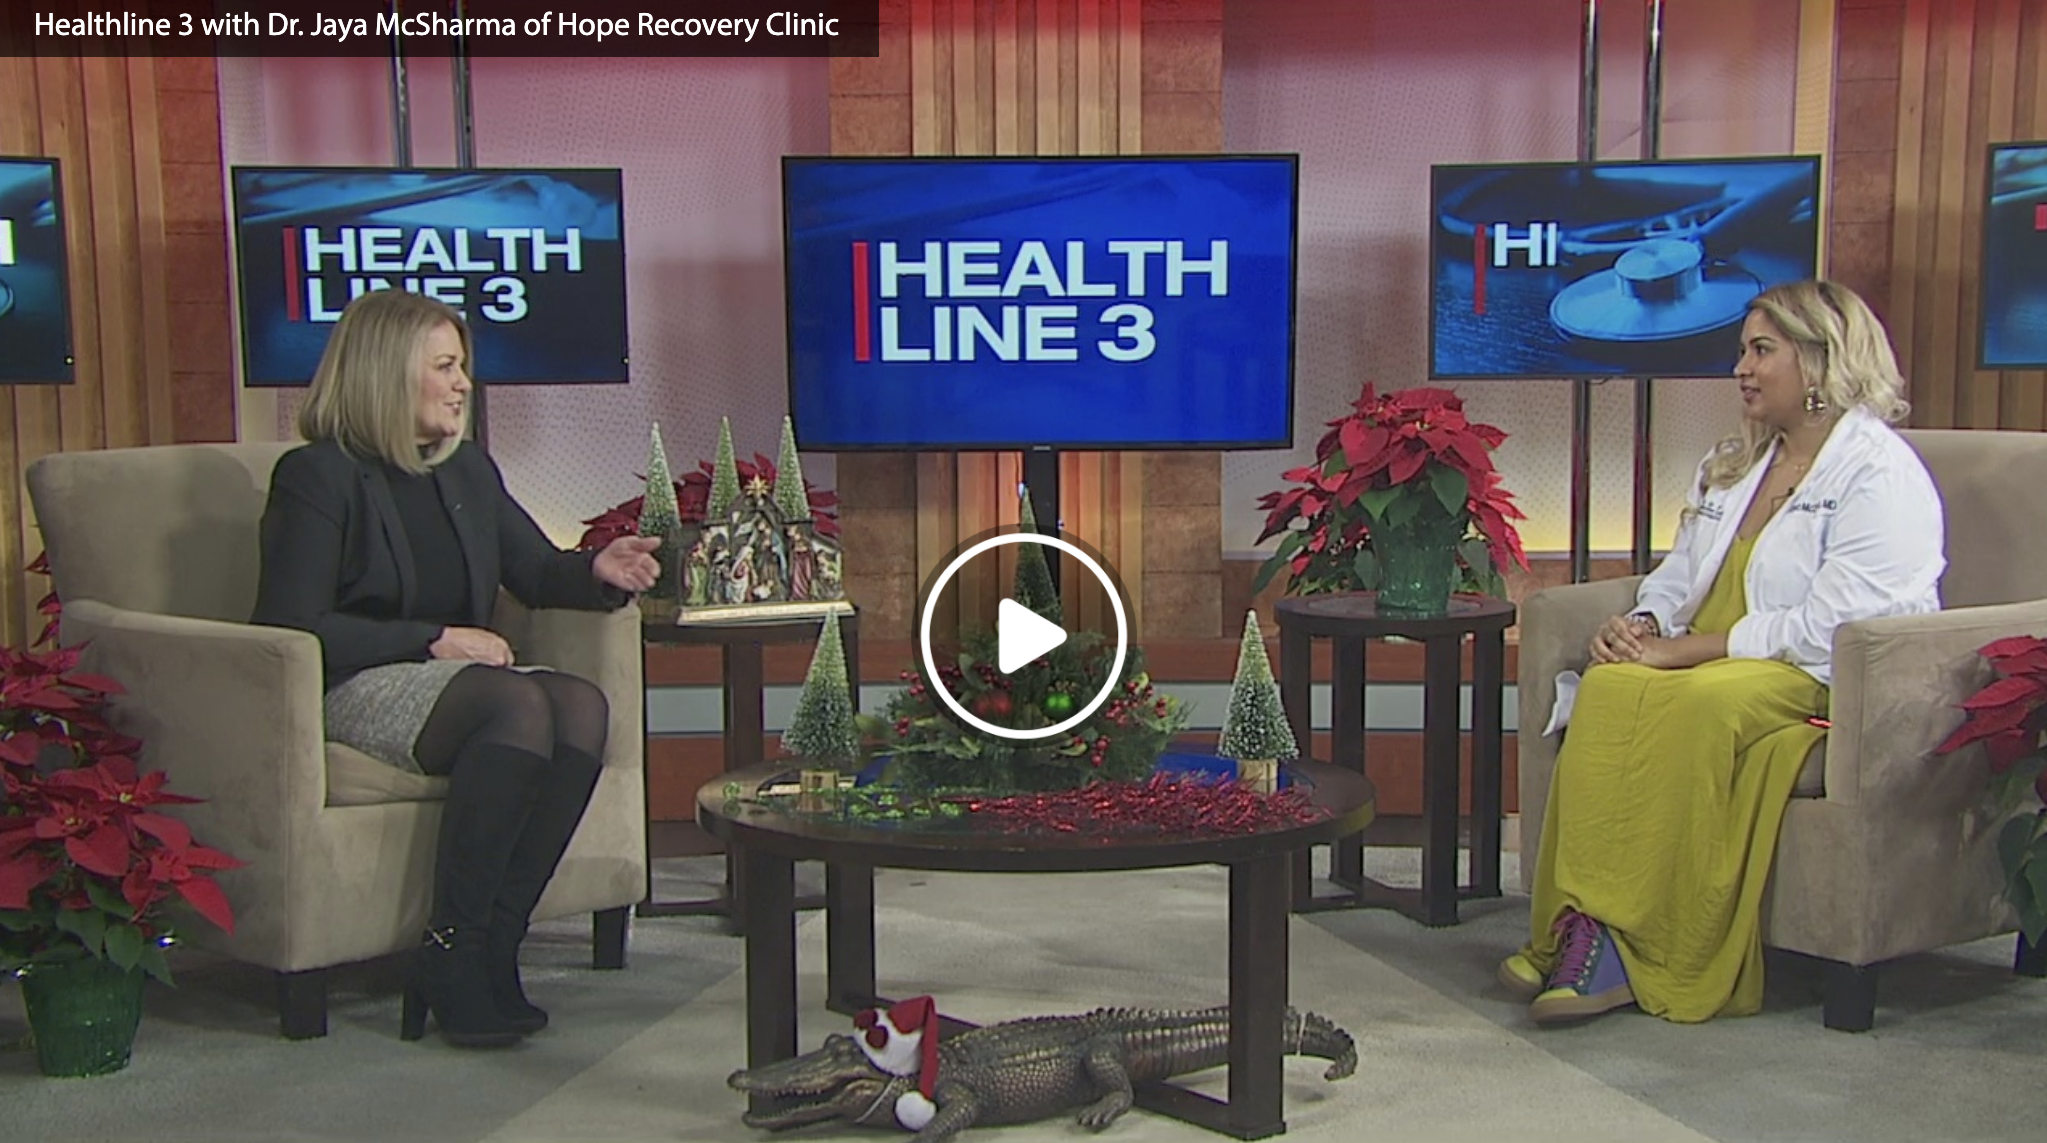 Featured image for “Healthline 3 with Dr. Jaya McSharma of Hope Recovery Clinic”